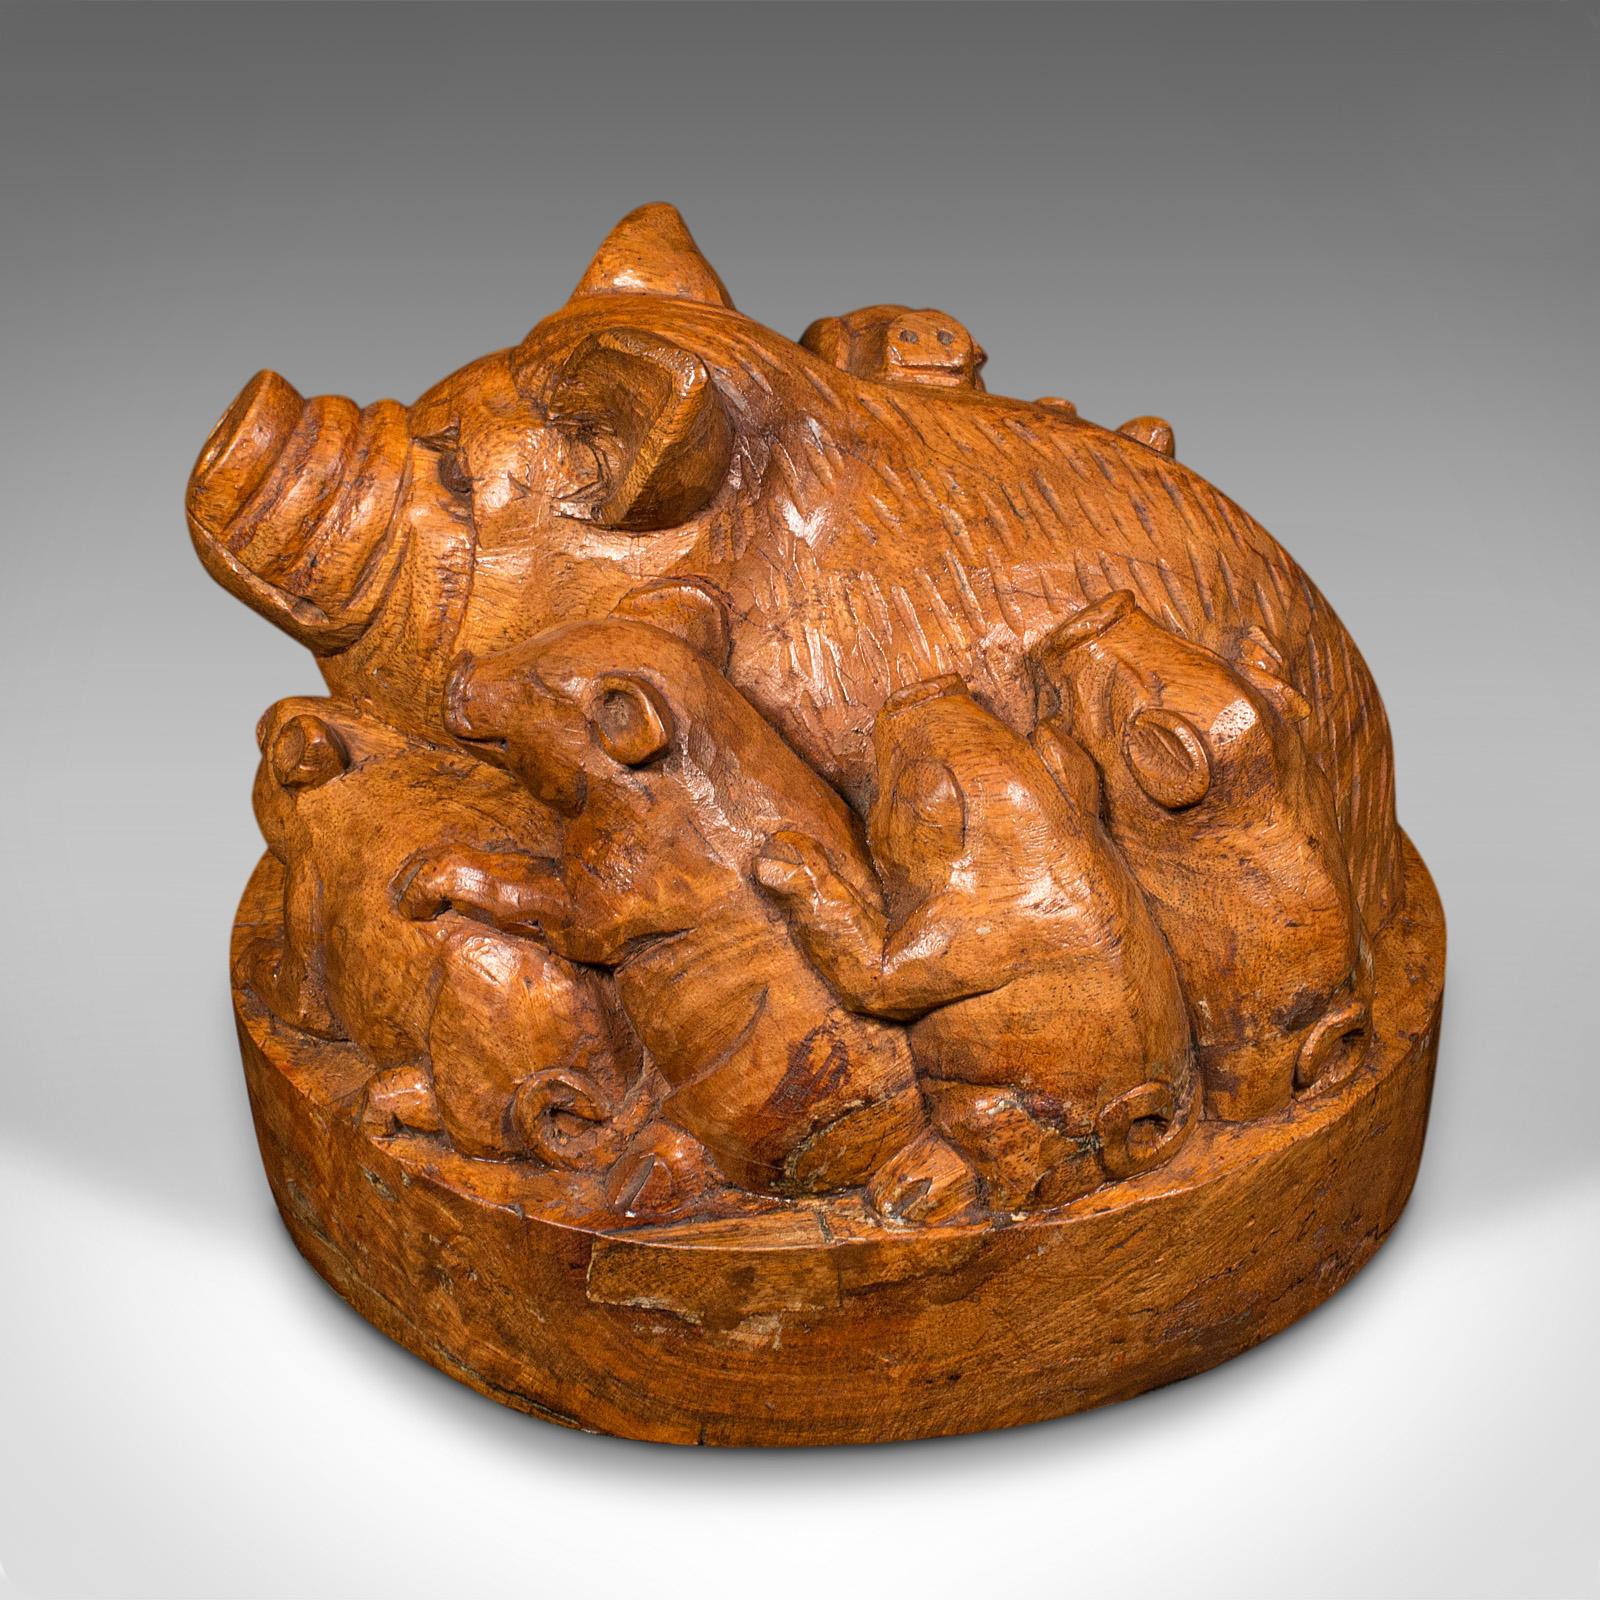 British Antique Carved Dome, English Cedar, Decorative Woodcarving, Pigs, Art, Victorian For Sale